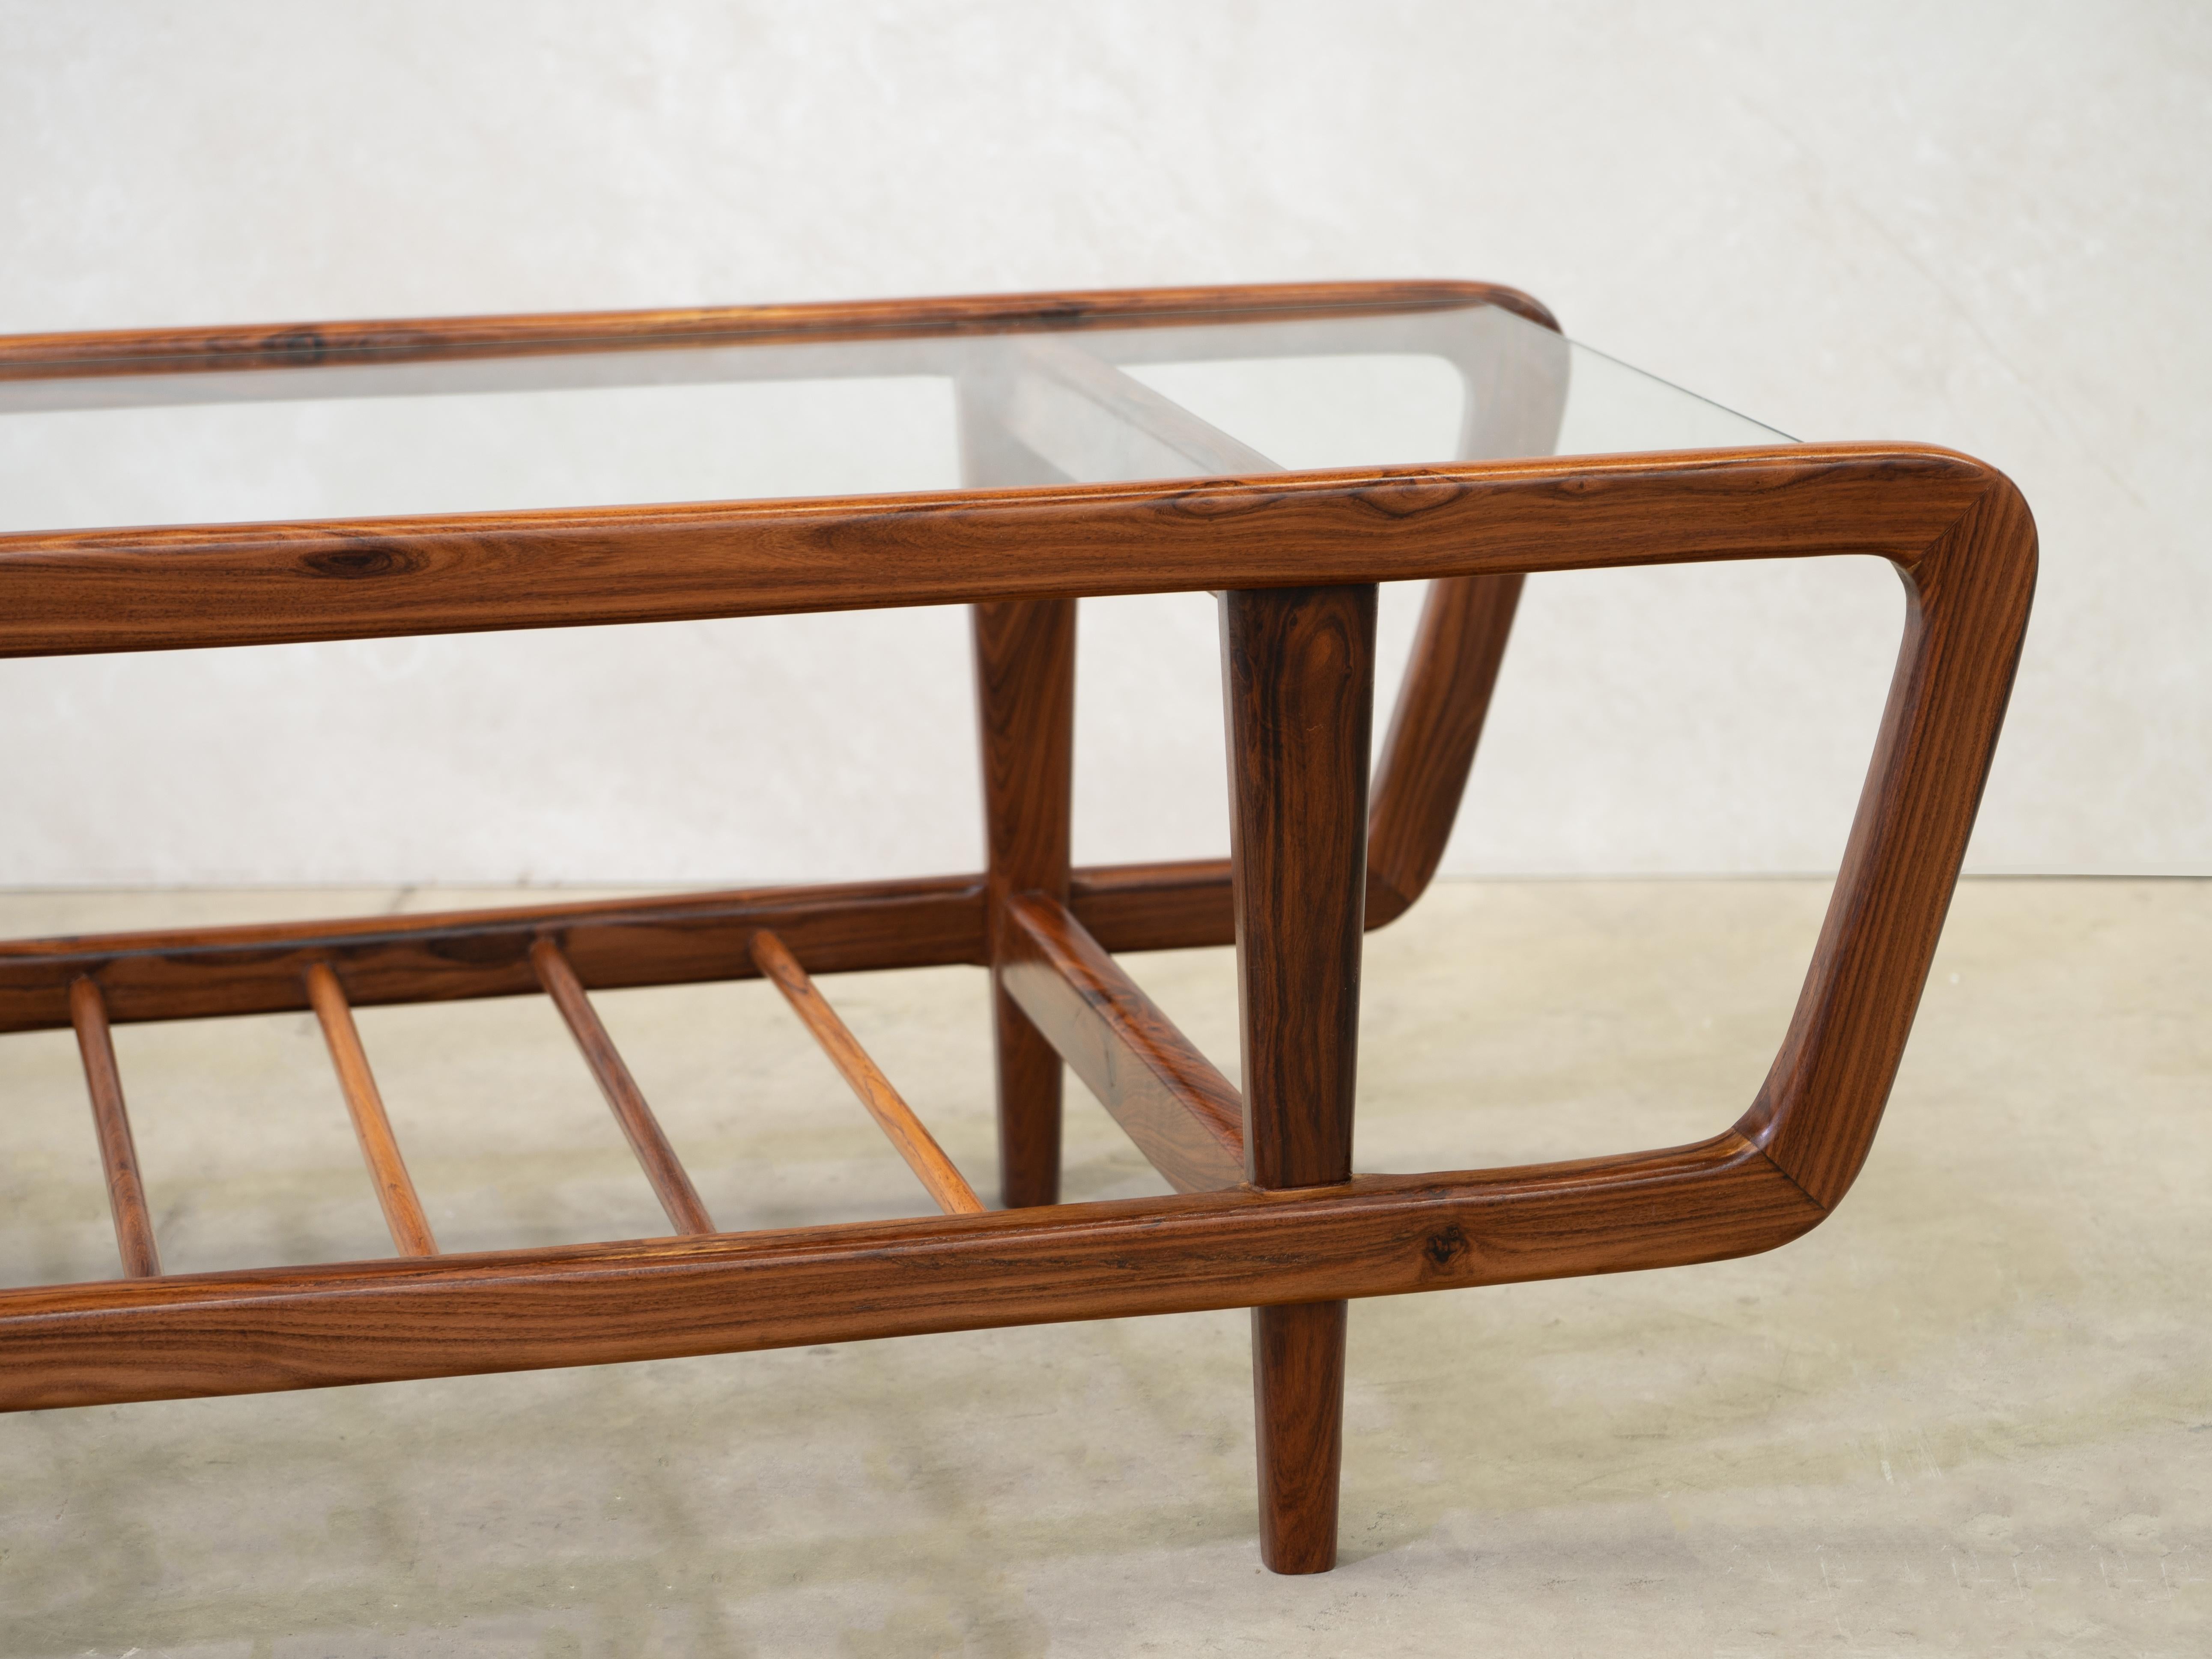 Rosewood Coffee Table by Giuseppe Scapinelli, Brazilian Mid Century ModernDesign